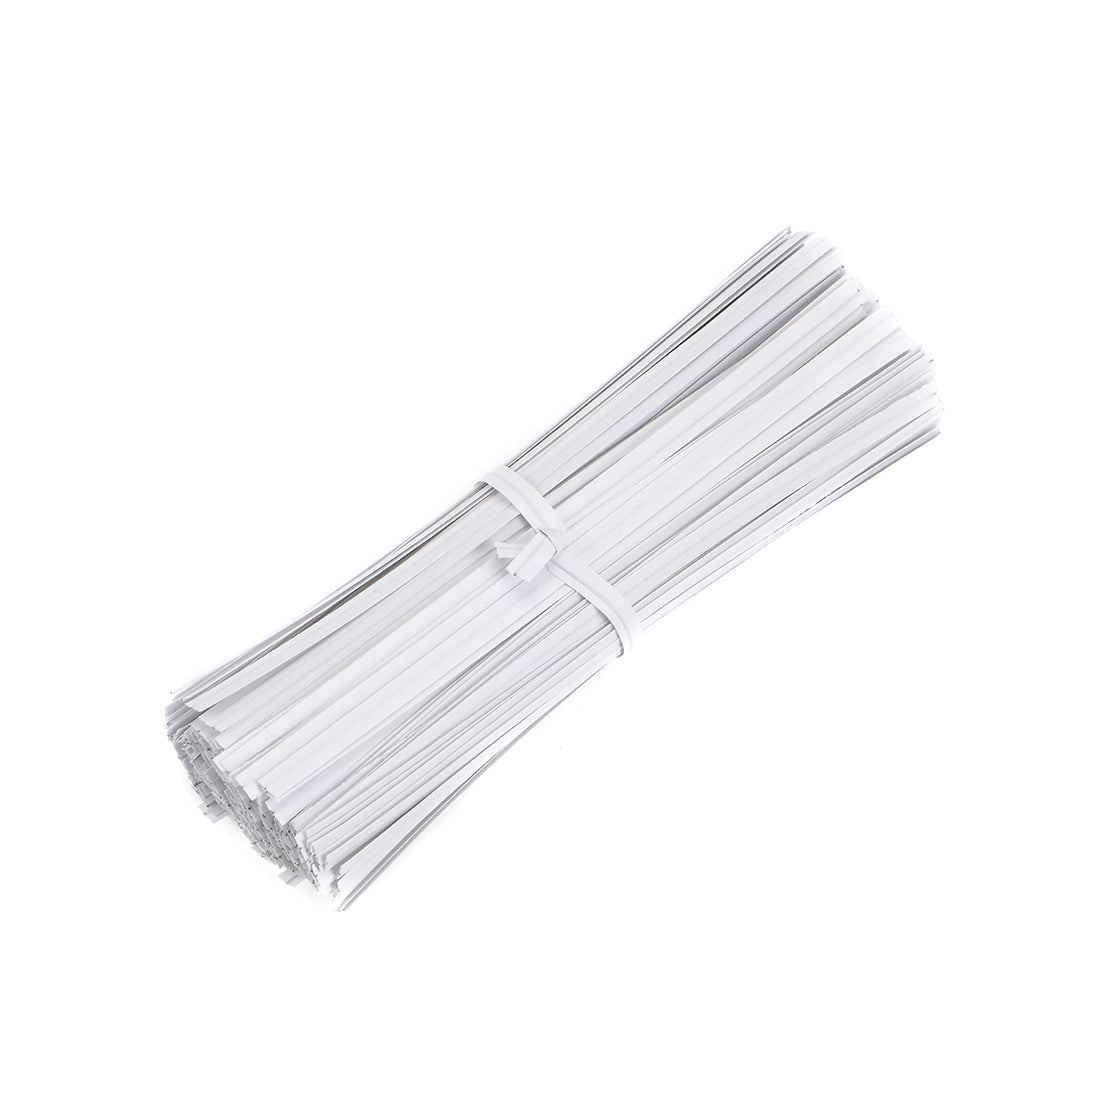 uxcell Uxcell Long Strong Twist Ties 4.7 Inches Quality  Closure Tie for Tying Gift Bags Art Craft Ties Manage Cords White 1000pcs